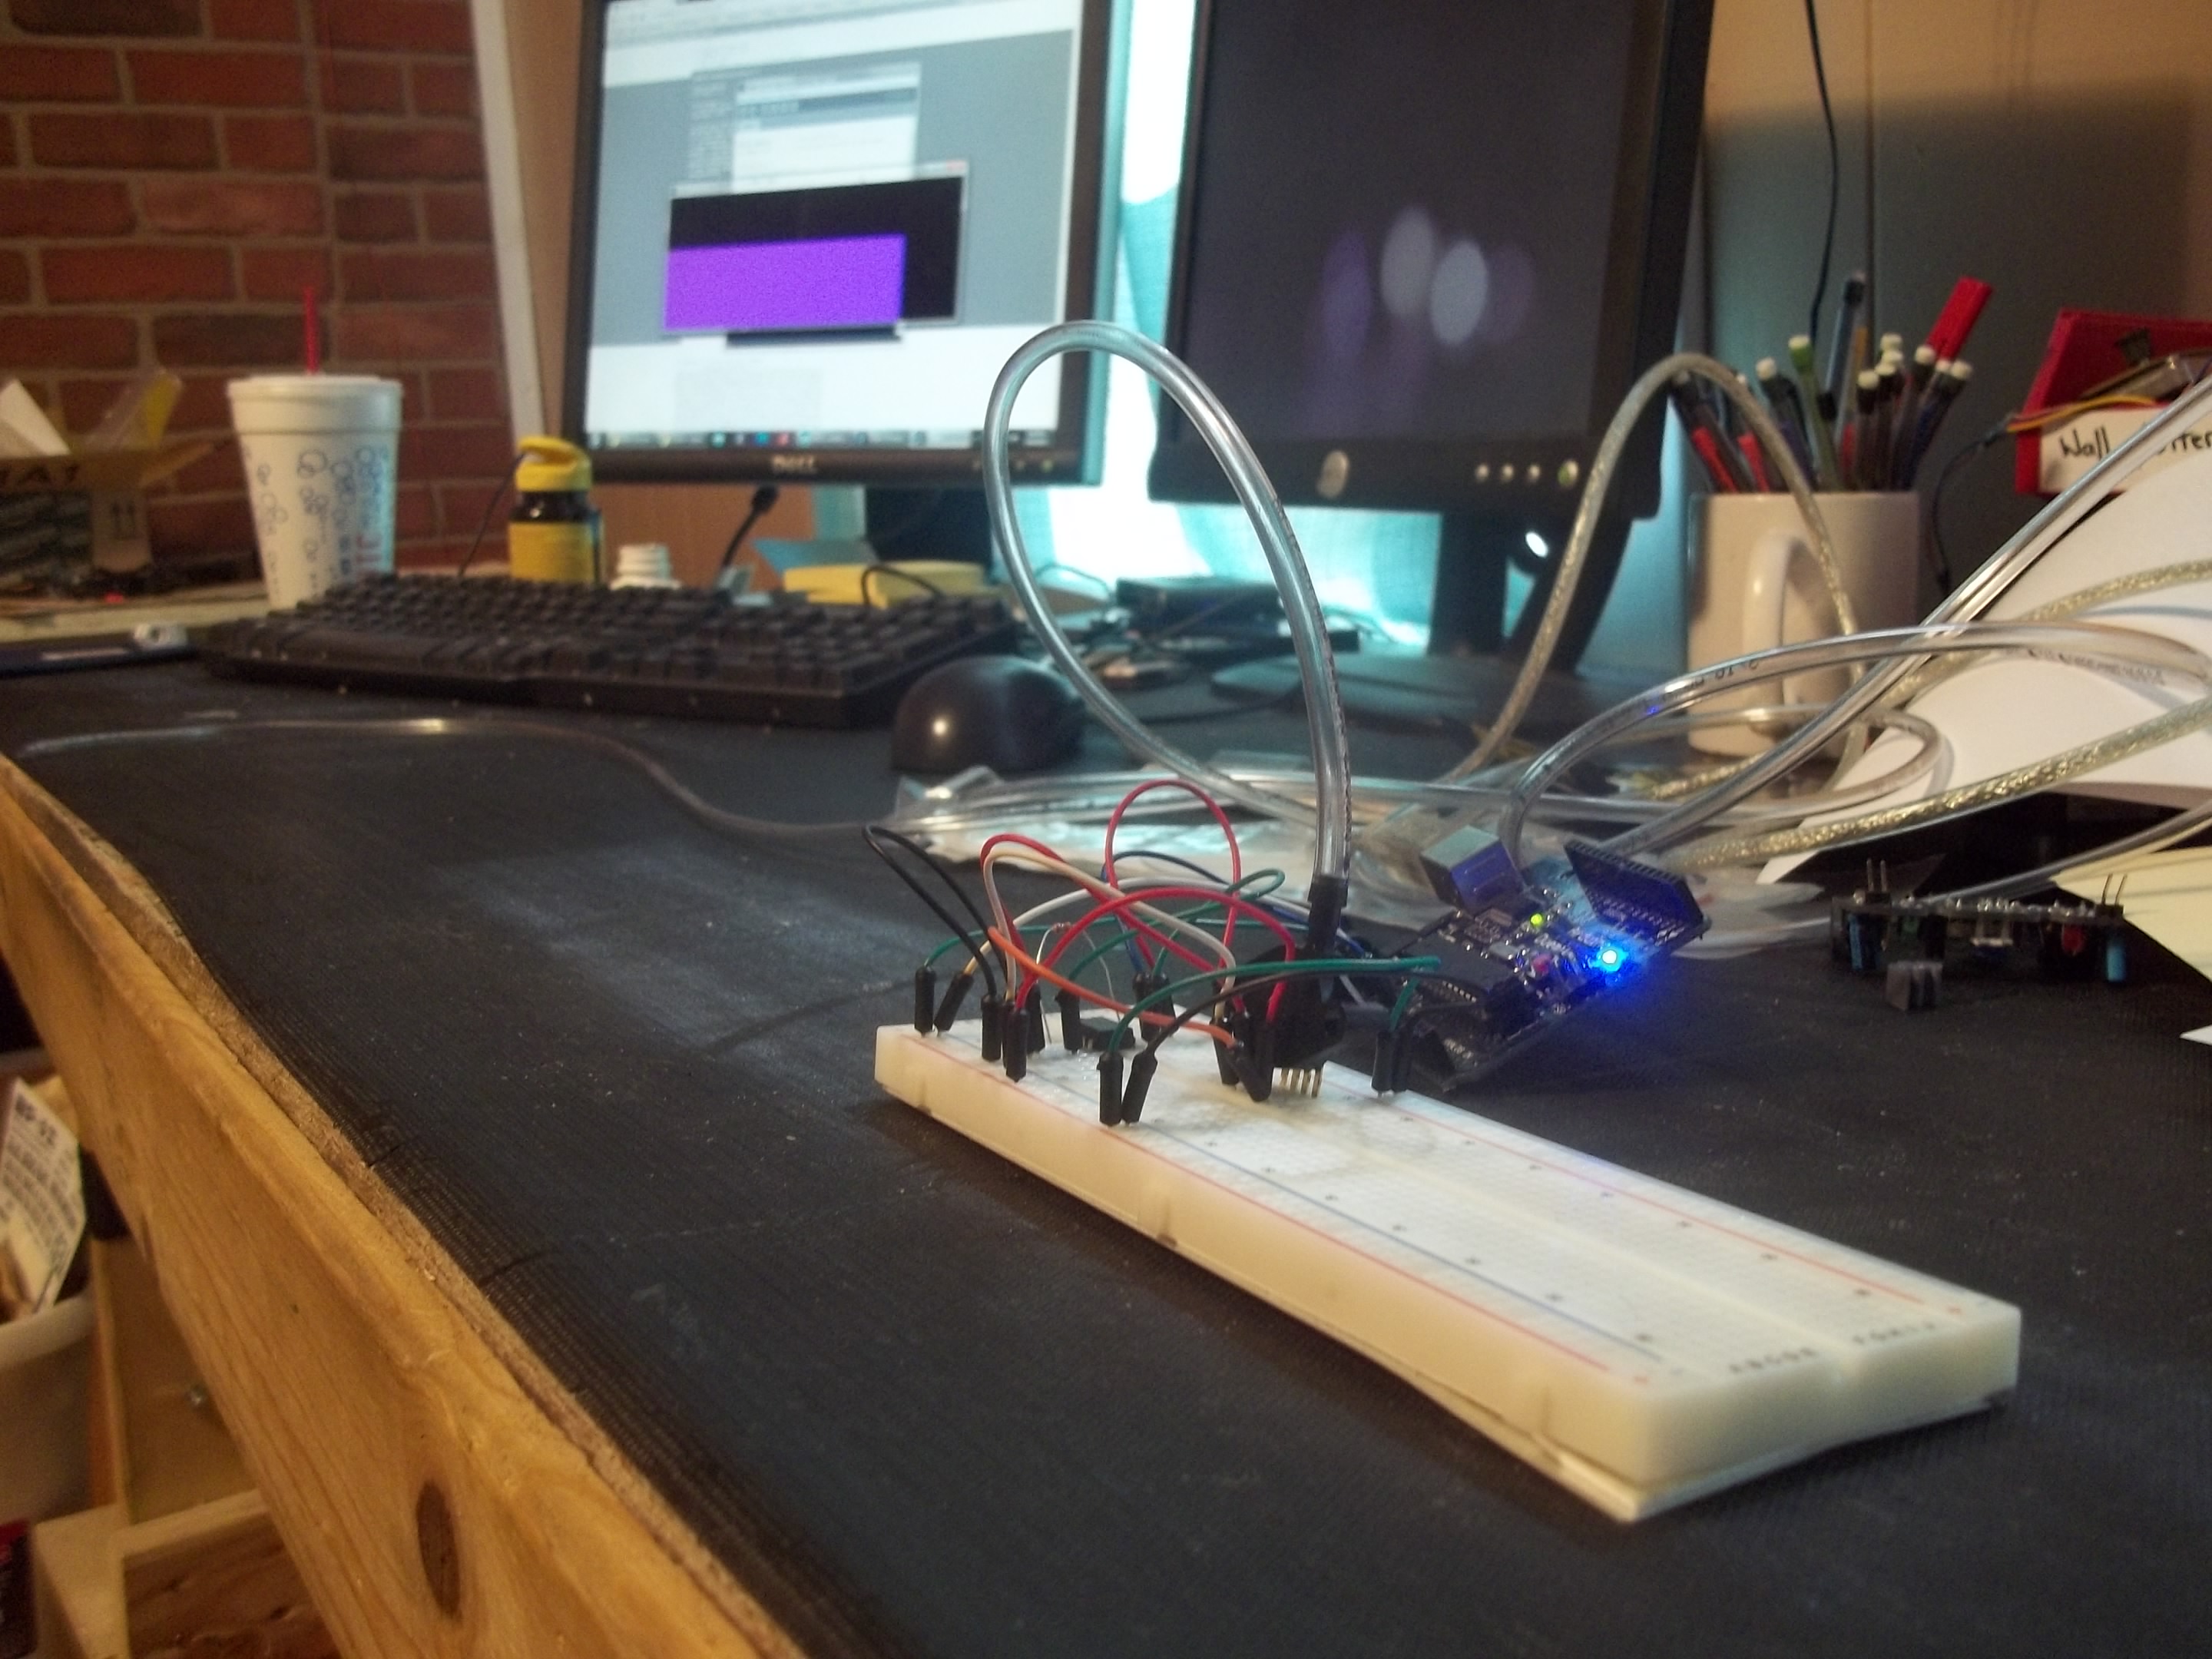 Working breadboard prototype of an open-source “sip and puff” interface